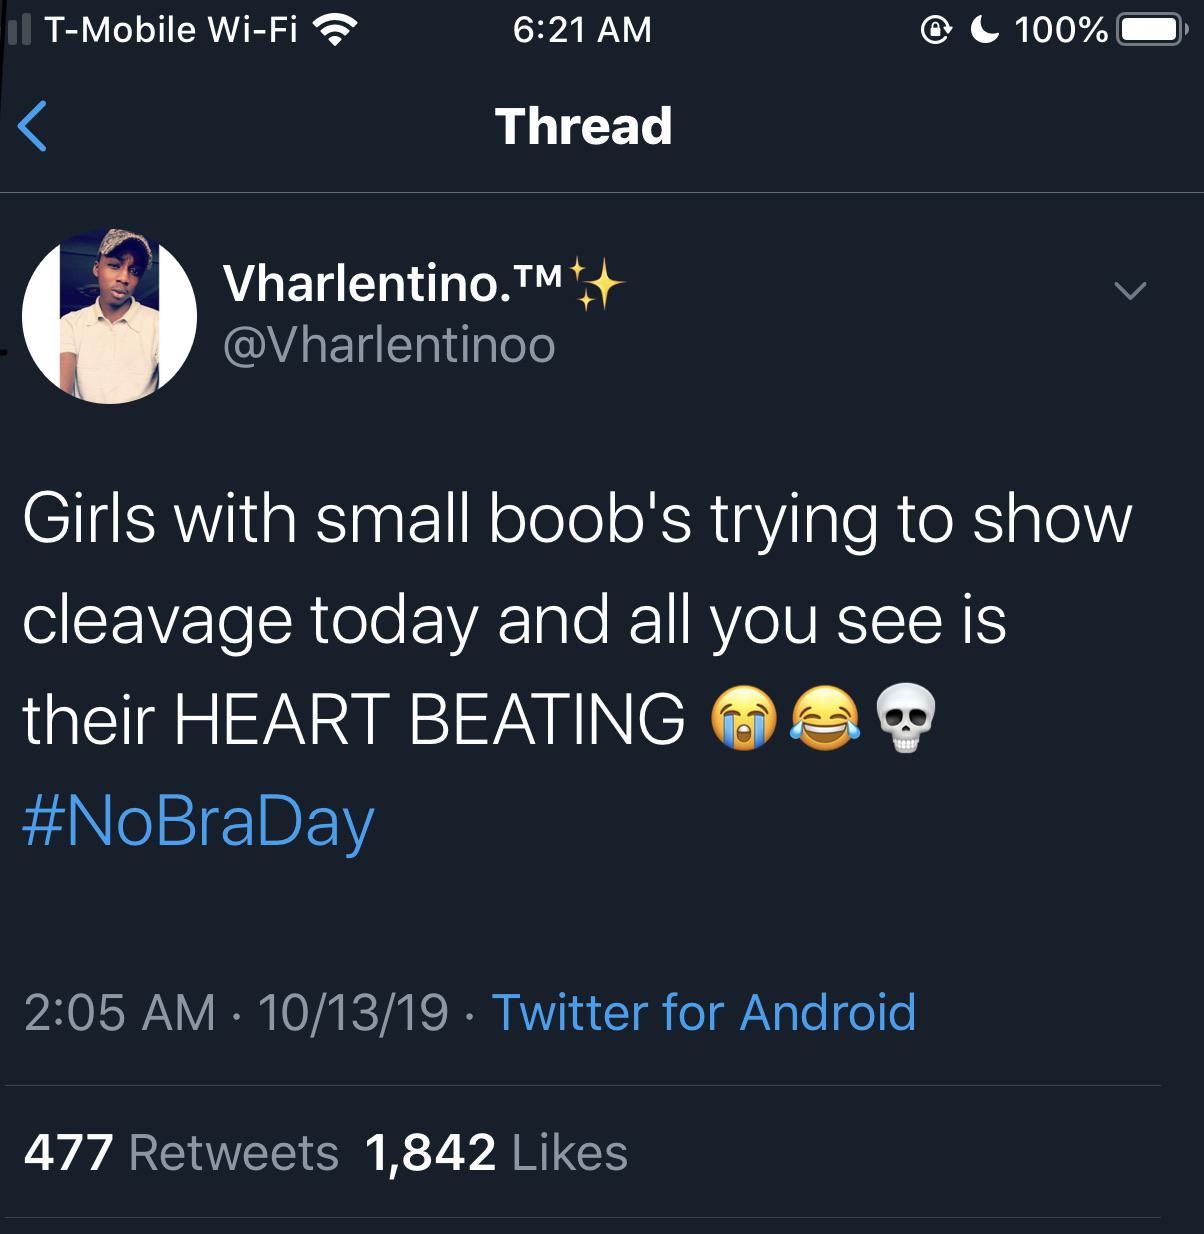 Girls with small boob's trying to show cleavage today and all you see is their Heart Beating A 101319 . Twitter for Android 477 1,842